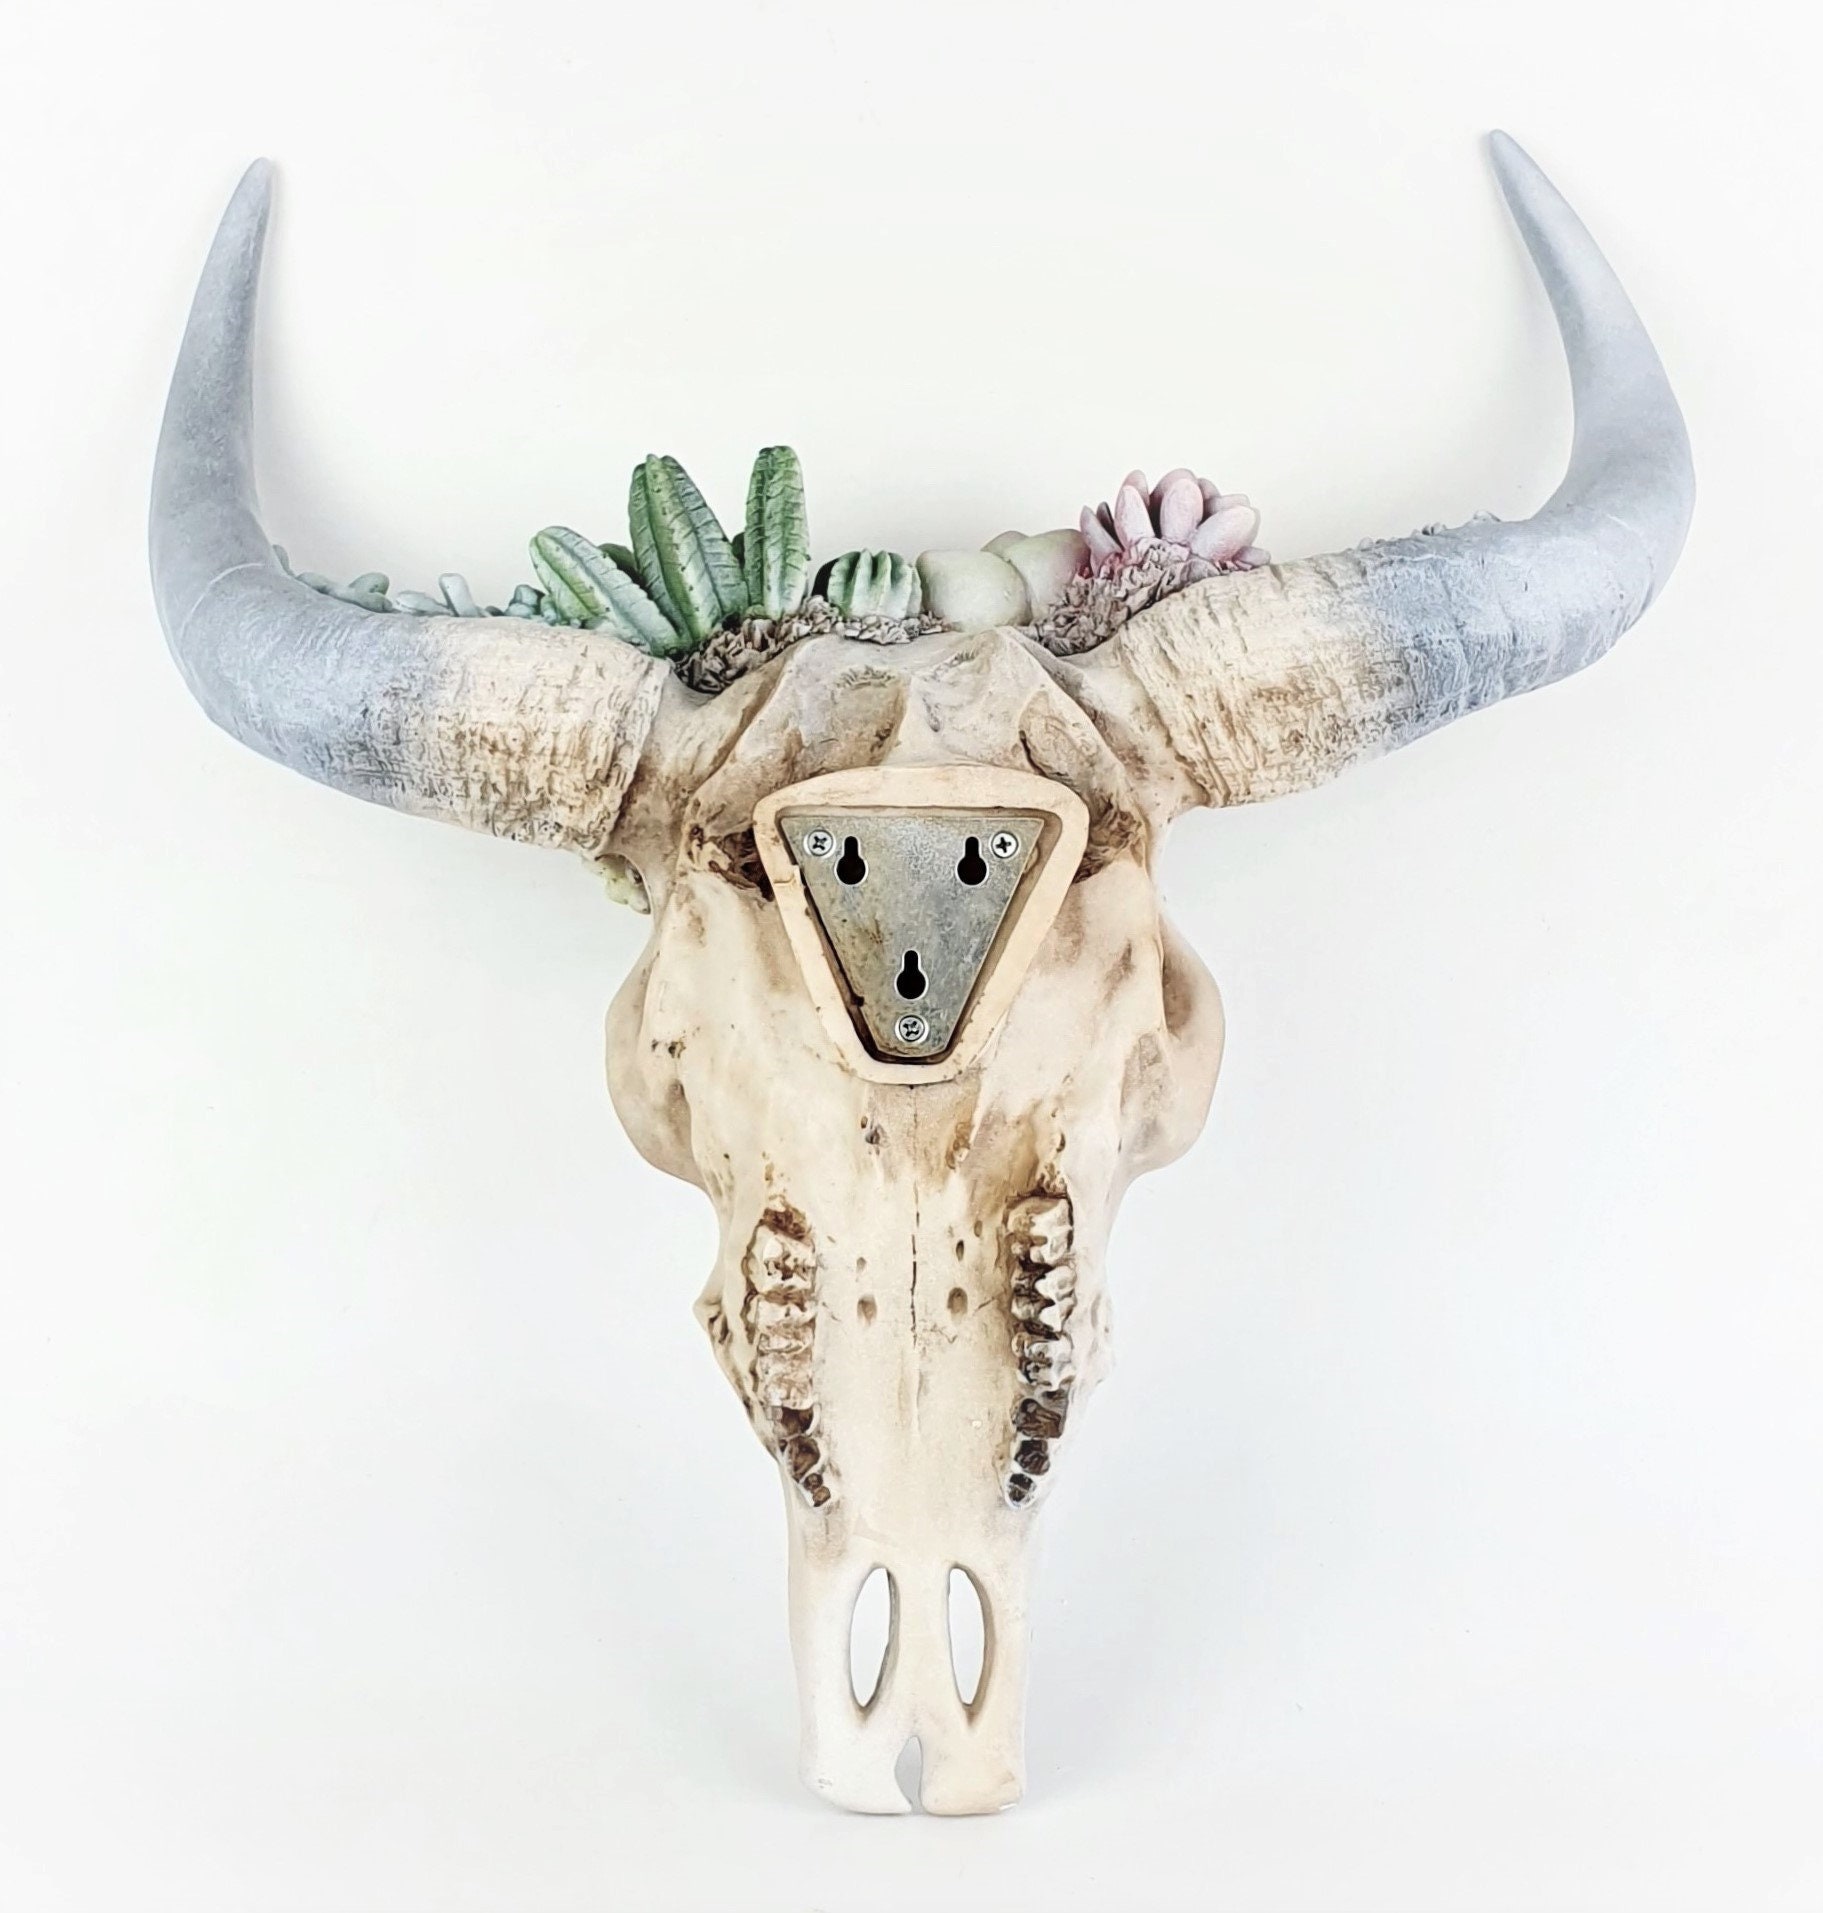 Bull Skull Wall Mounted Sculpture Succulents/Flowers Figurines Home Decor 